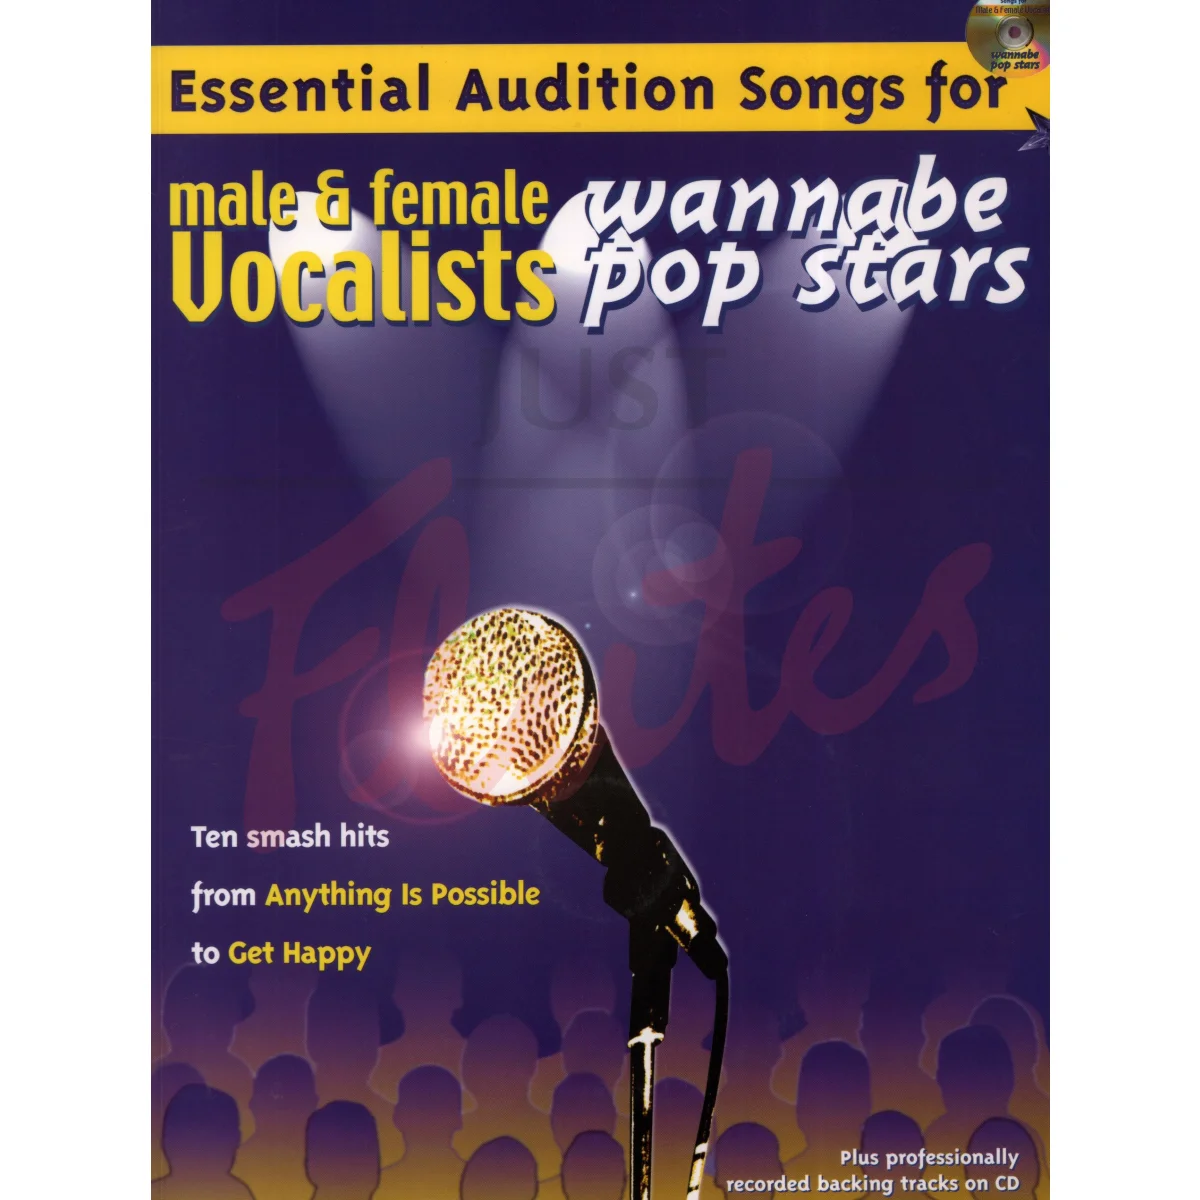 Essential Audition Songs for Male and Female Vocalists: Wannabe Stars